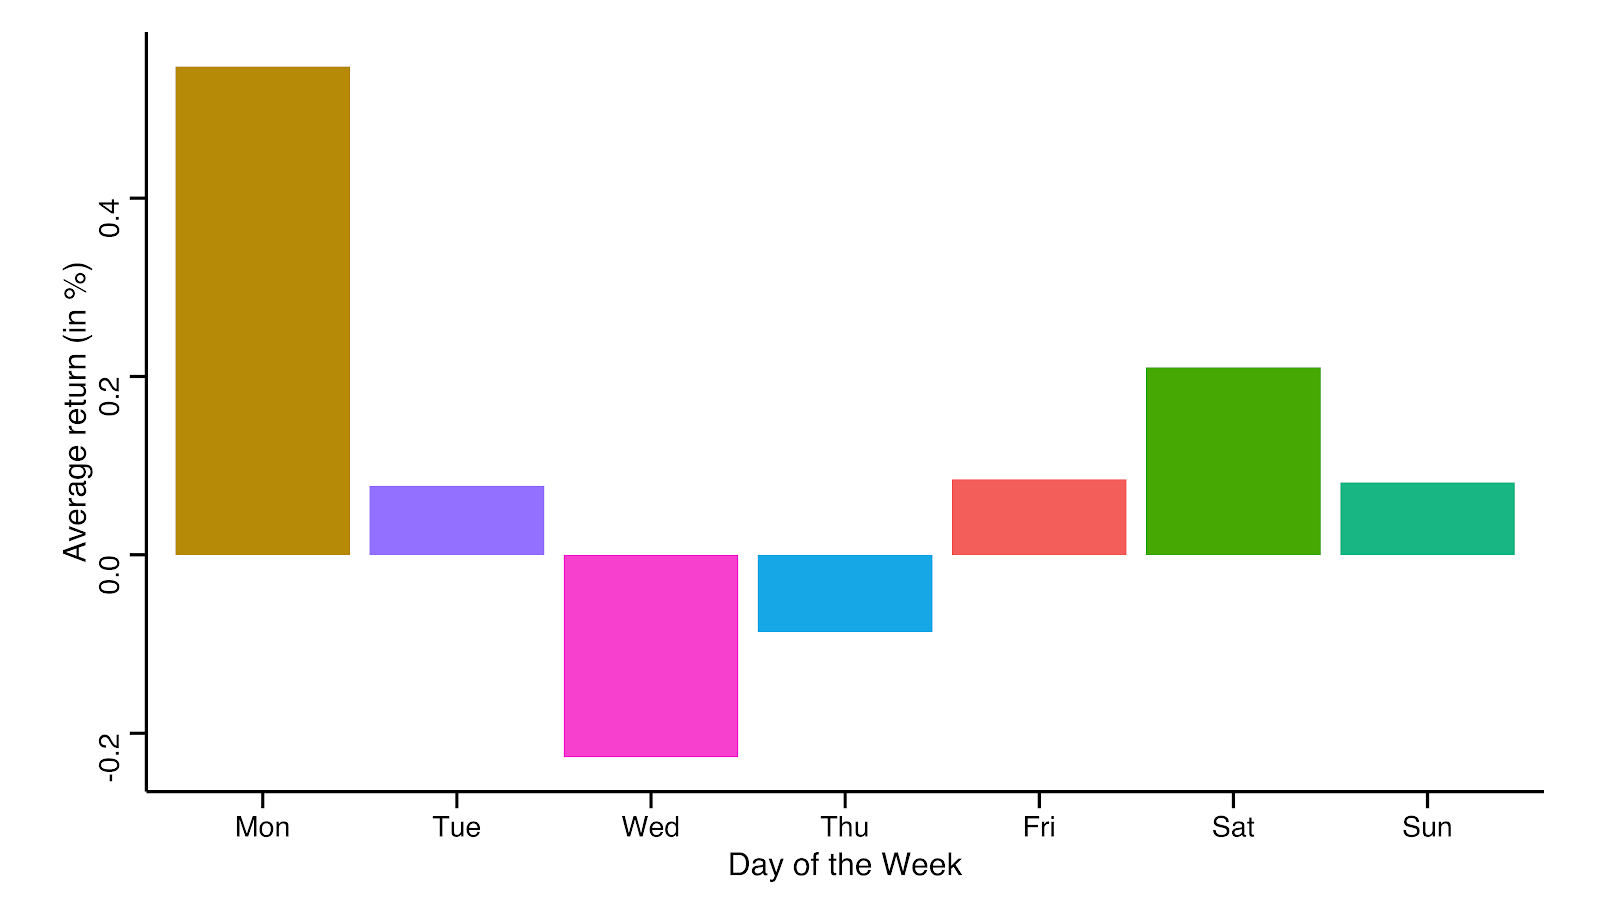 Average Daily Return for each Day of the Week between April 2013 and January 2020